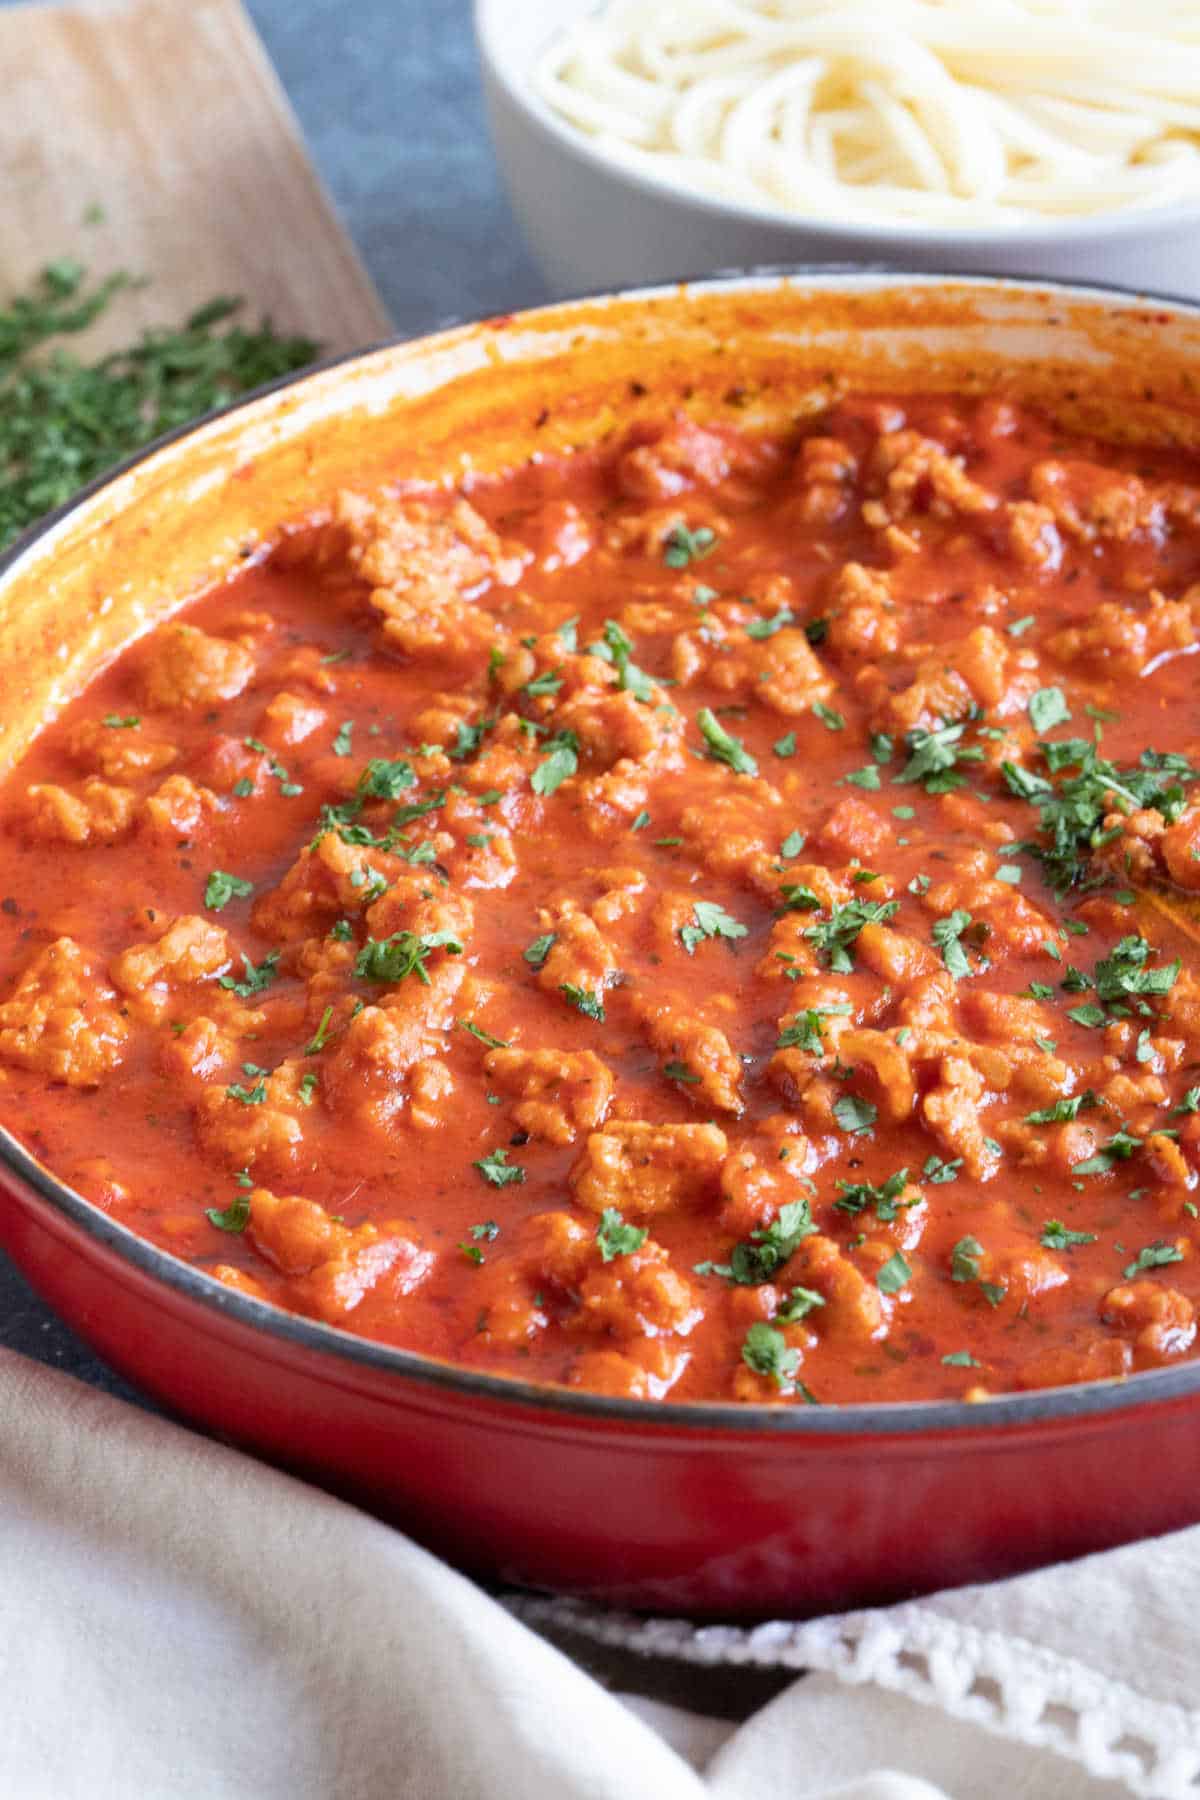 Chicken bolognese in a red pan.